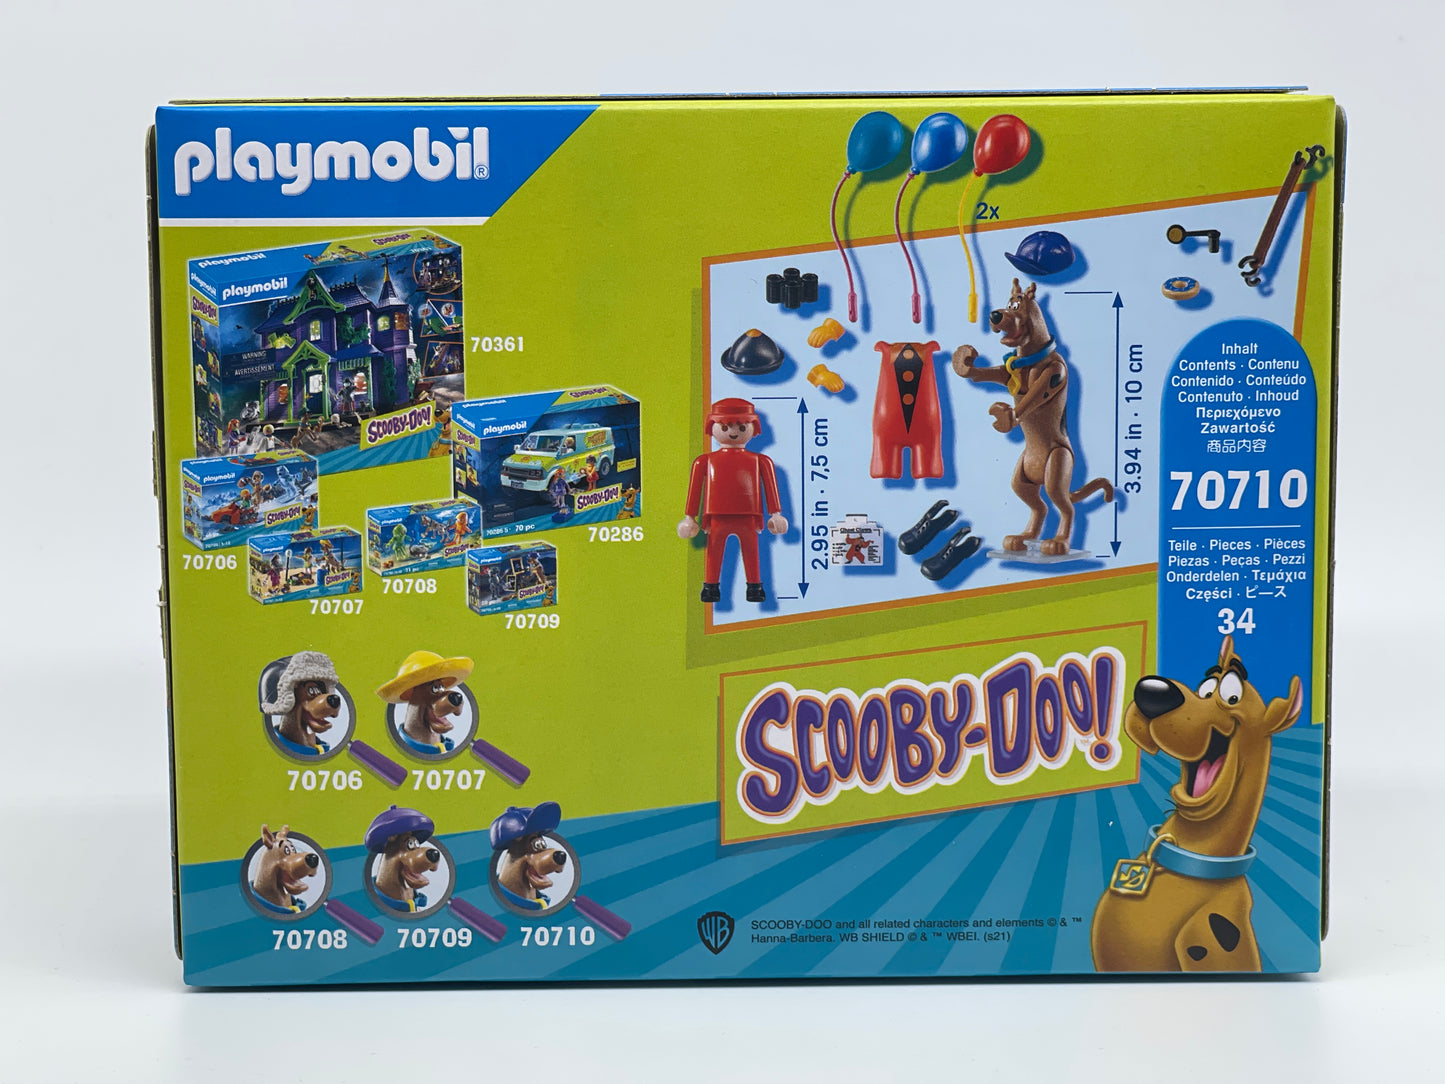 Playmobil "Adventures with Ghost Clown" Scooby Doo 70710 (2021) 